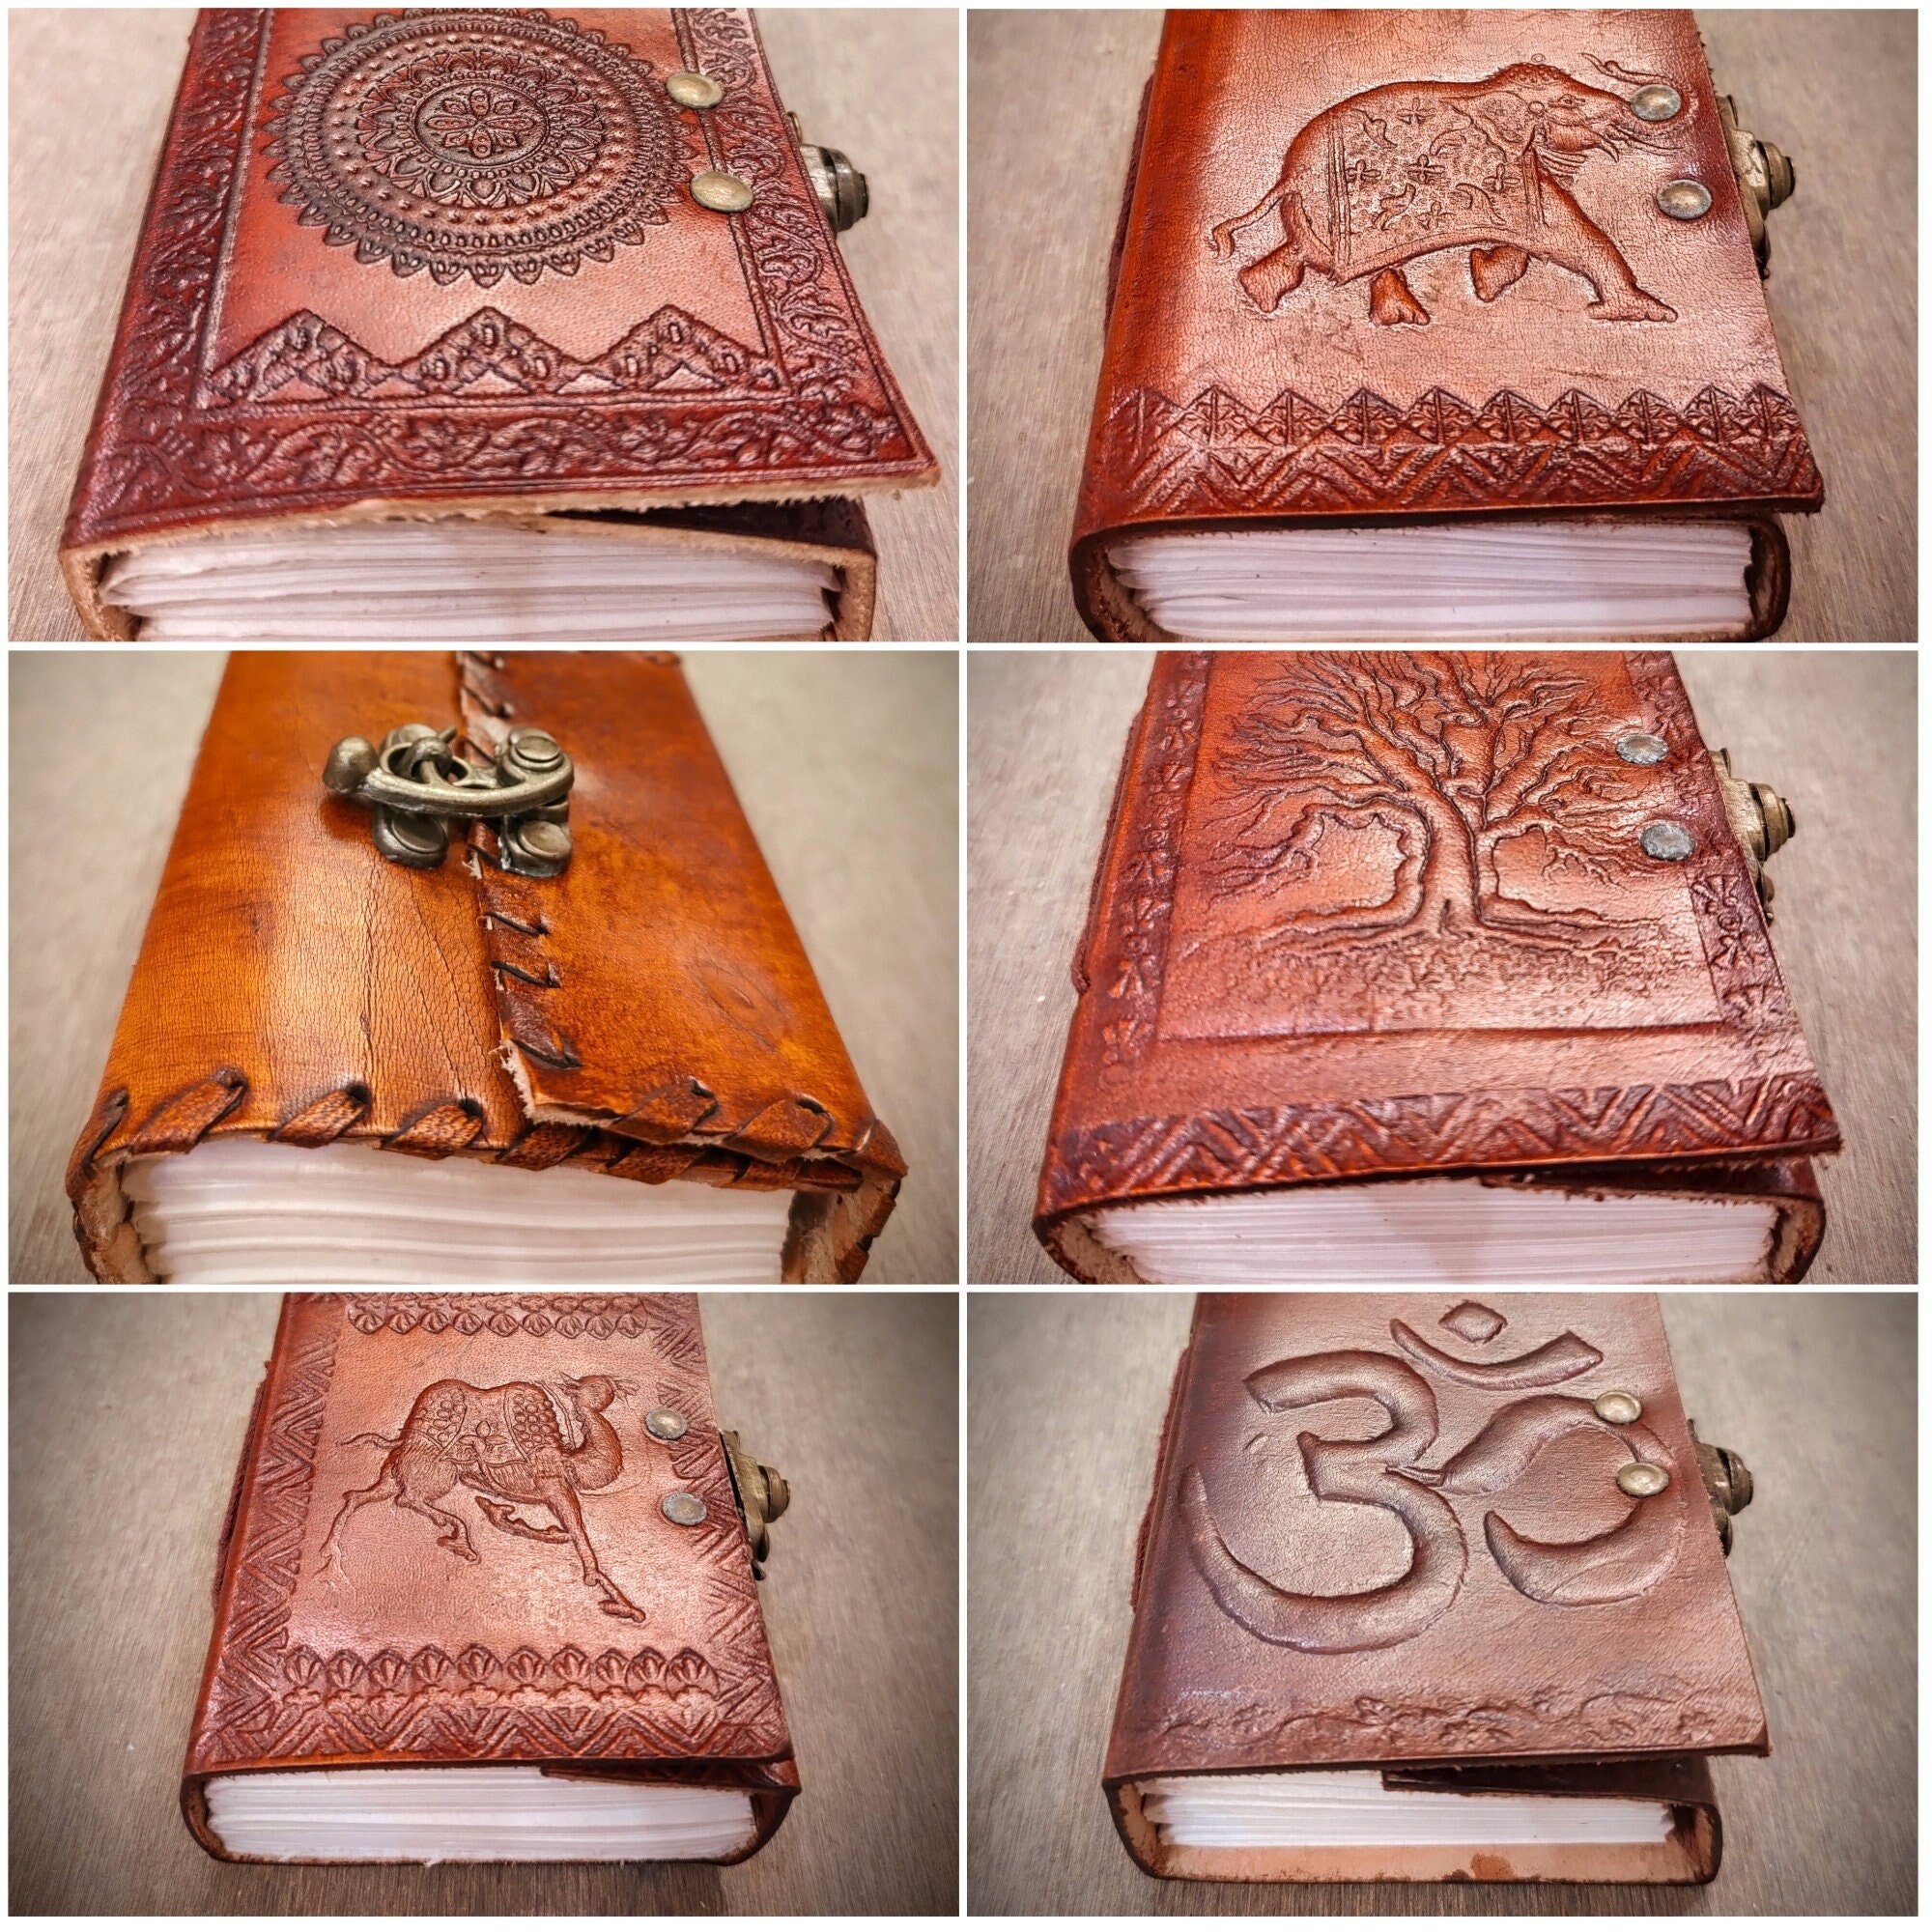 Large Leather Bound Elephant Embossed Journal Locked Diary With Lock 7 by 10 